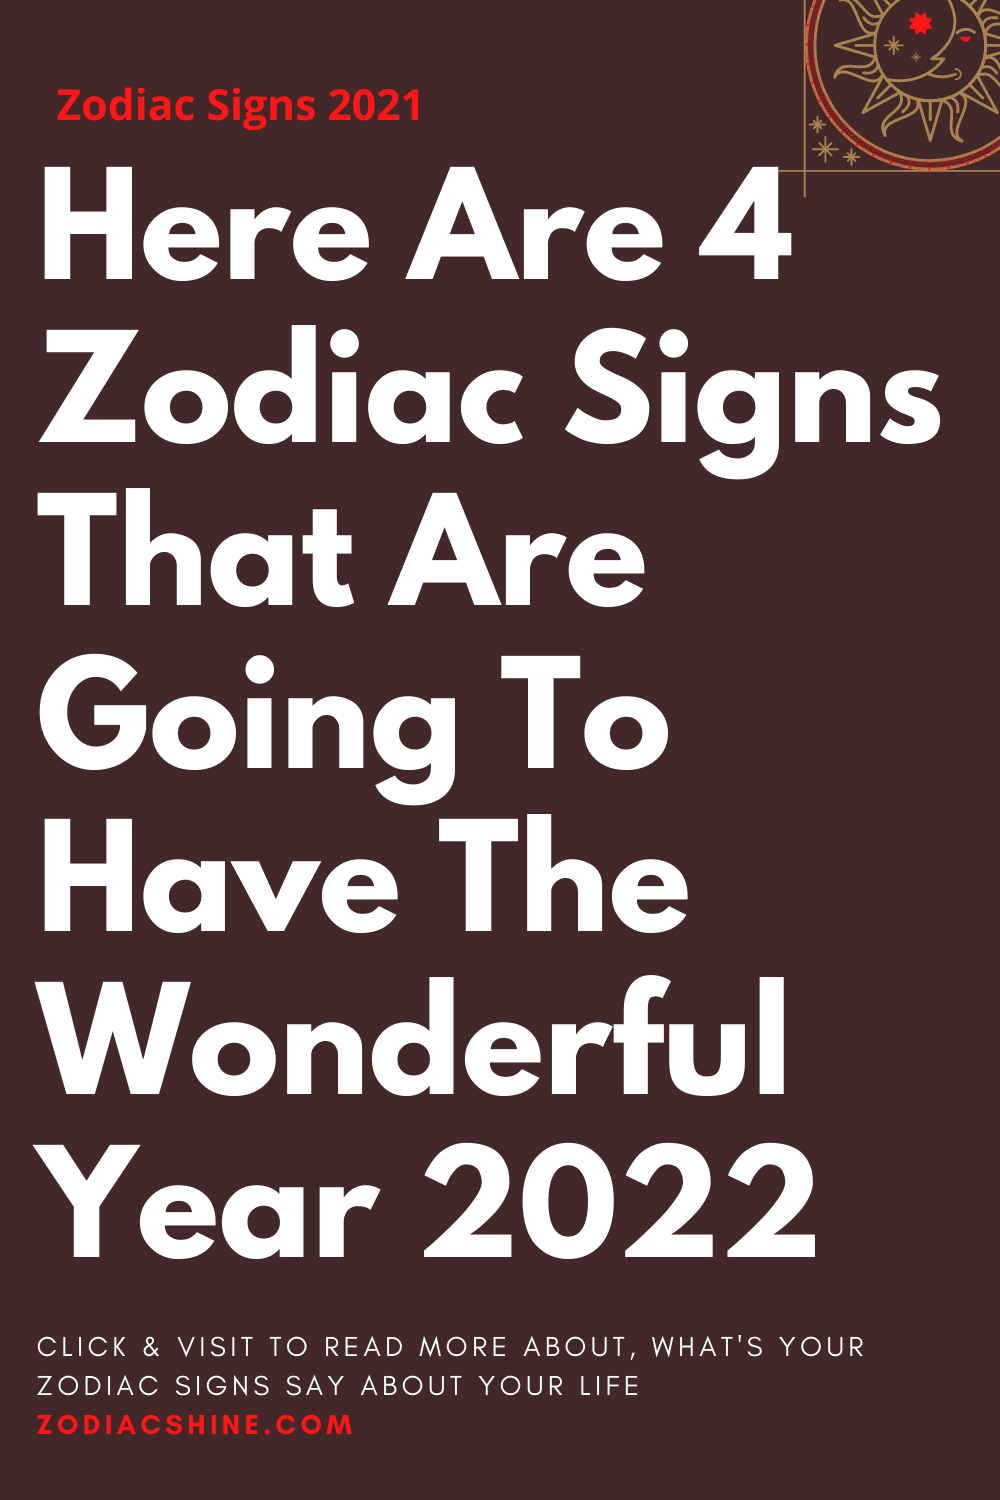 Here Are 4 Zodiac Signs That Are Going To Have The Wonderful Year 2022